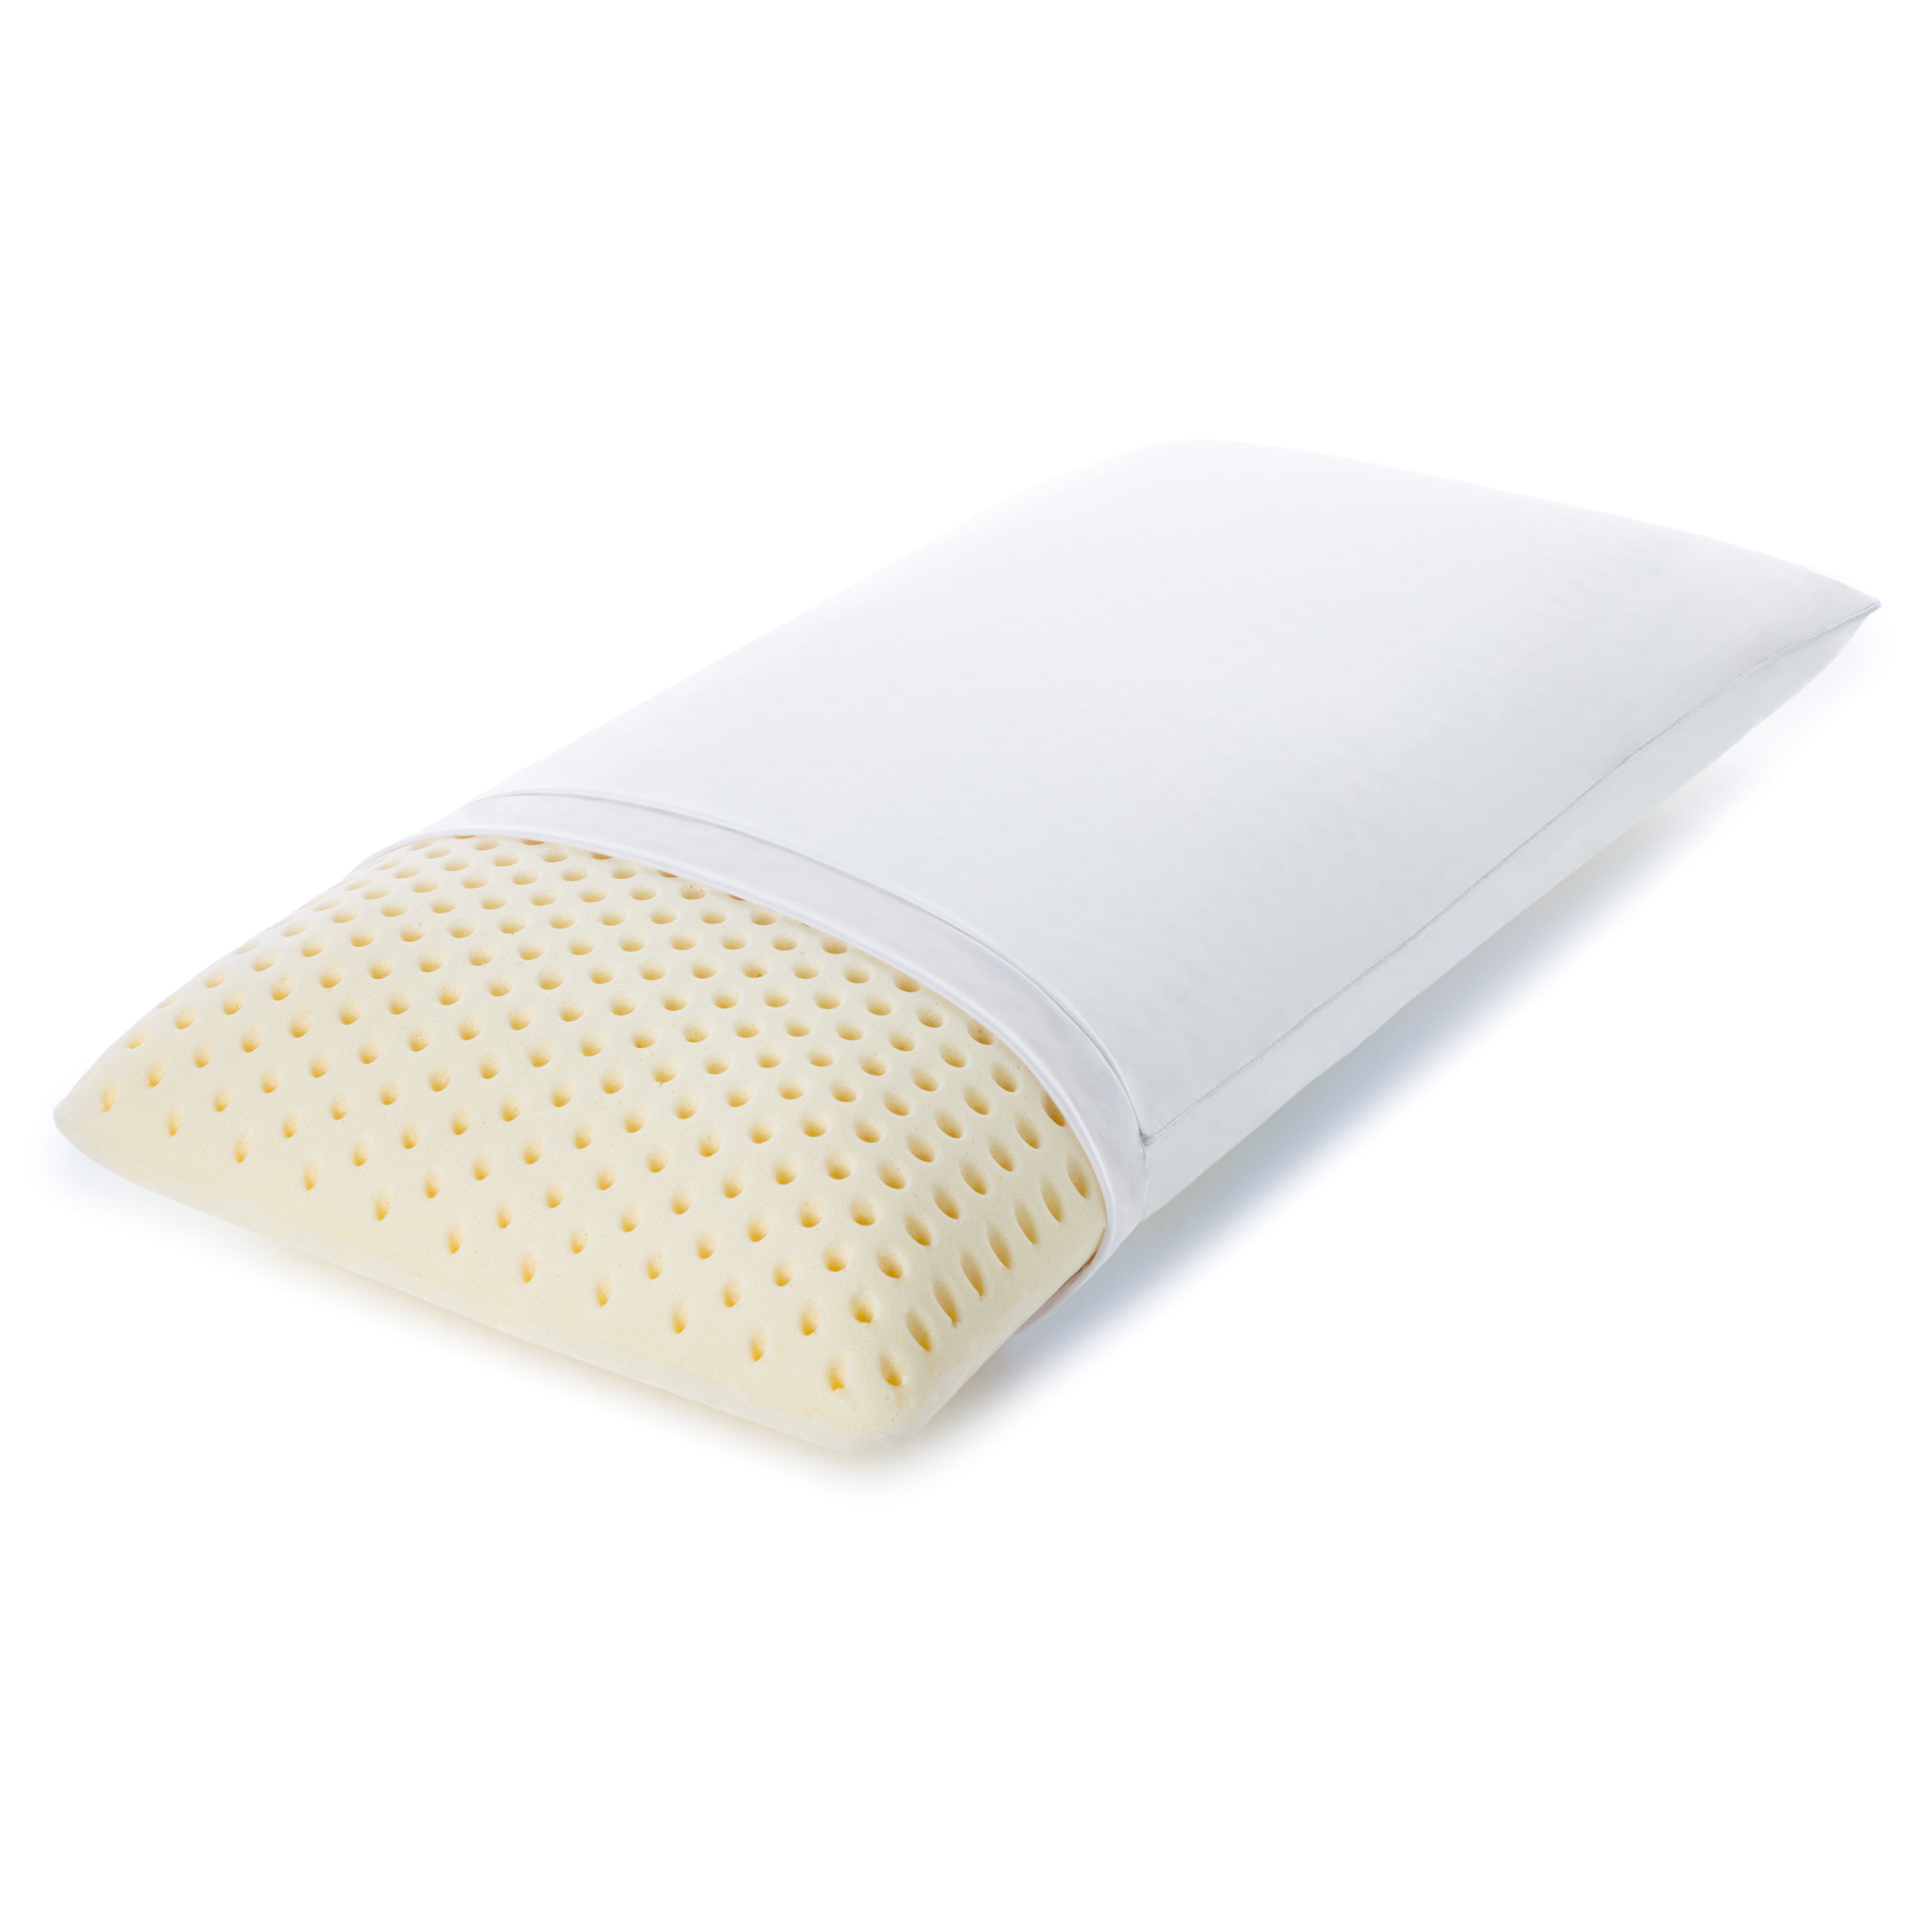 Latex Bed Pillow - Talalay Low Profile - Durable, Contouring, Soft 100% Natural Latex with Soothing Properties. Relieve Pressure - Aches & Pains Melt Away, Linner and Cover, Queen